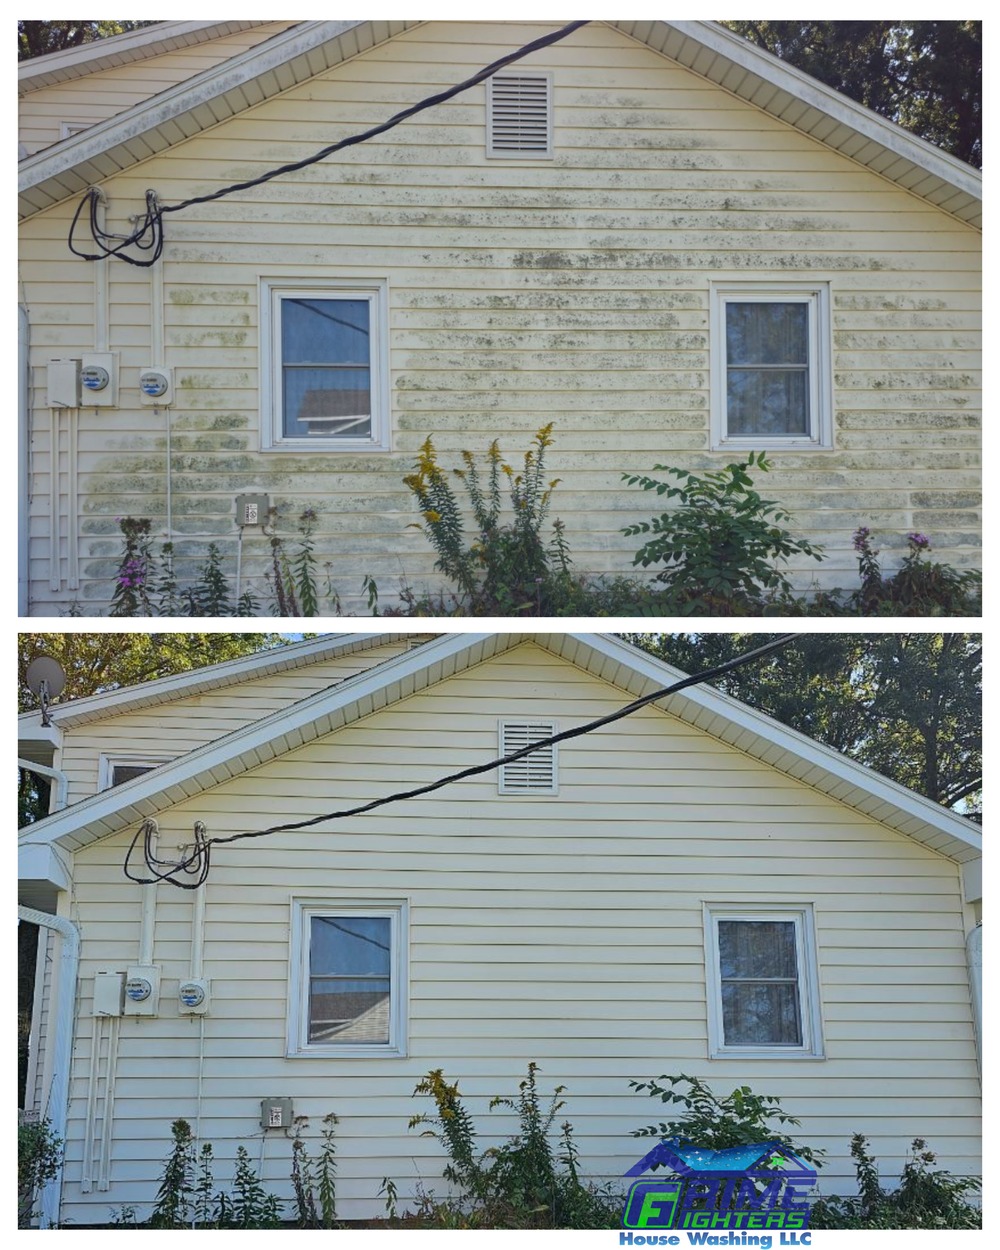 Grime Fighters House Washing Revitalizes Maryanne's Home in St. Joseph, Missouri! (2)